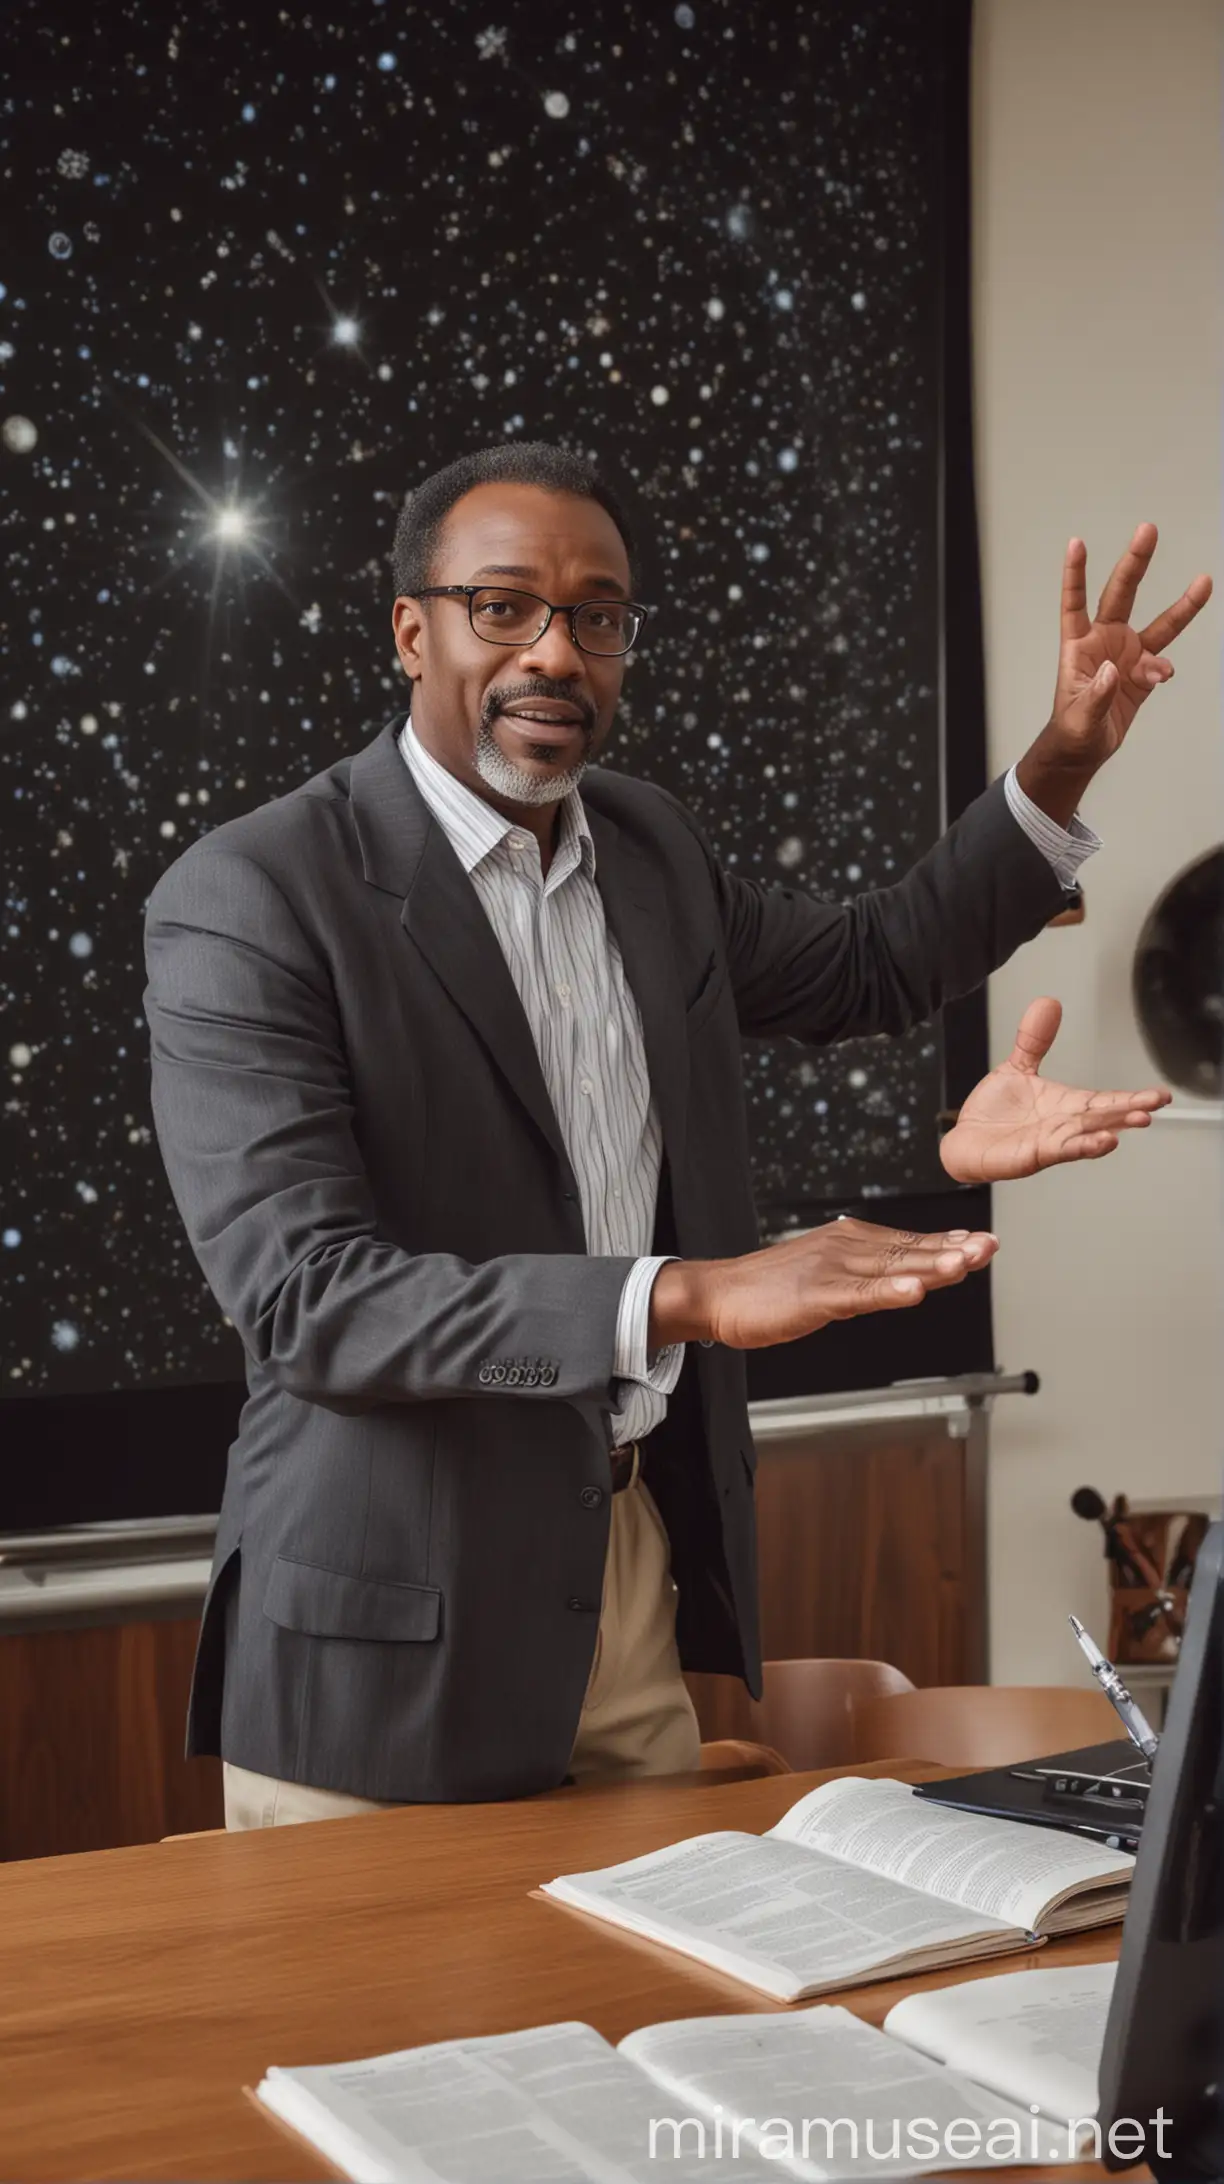 An Astronomy professor giving a lecture in a university. He is African American. His hands are out of view.